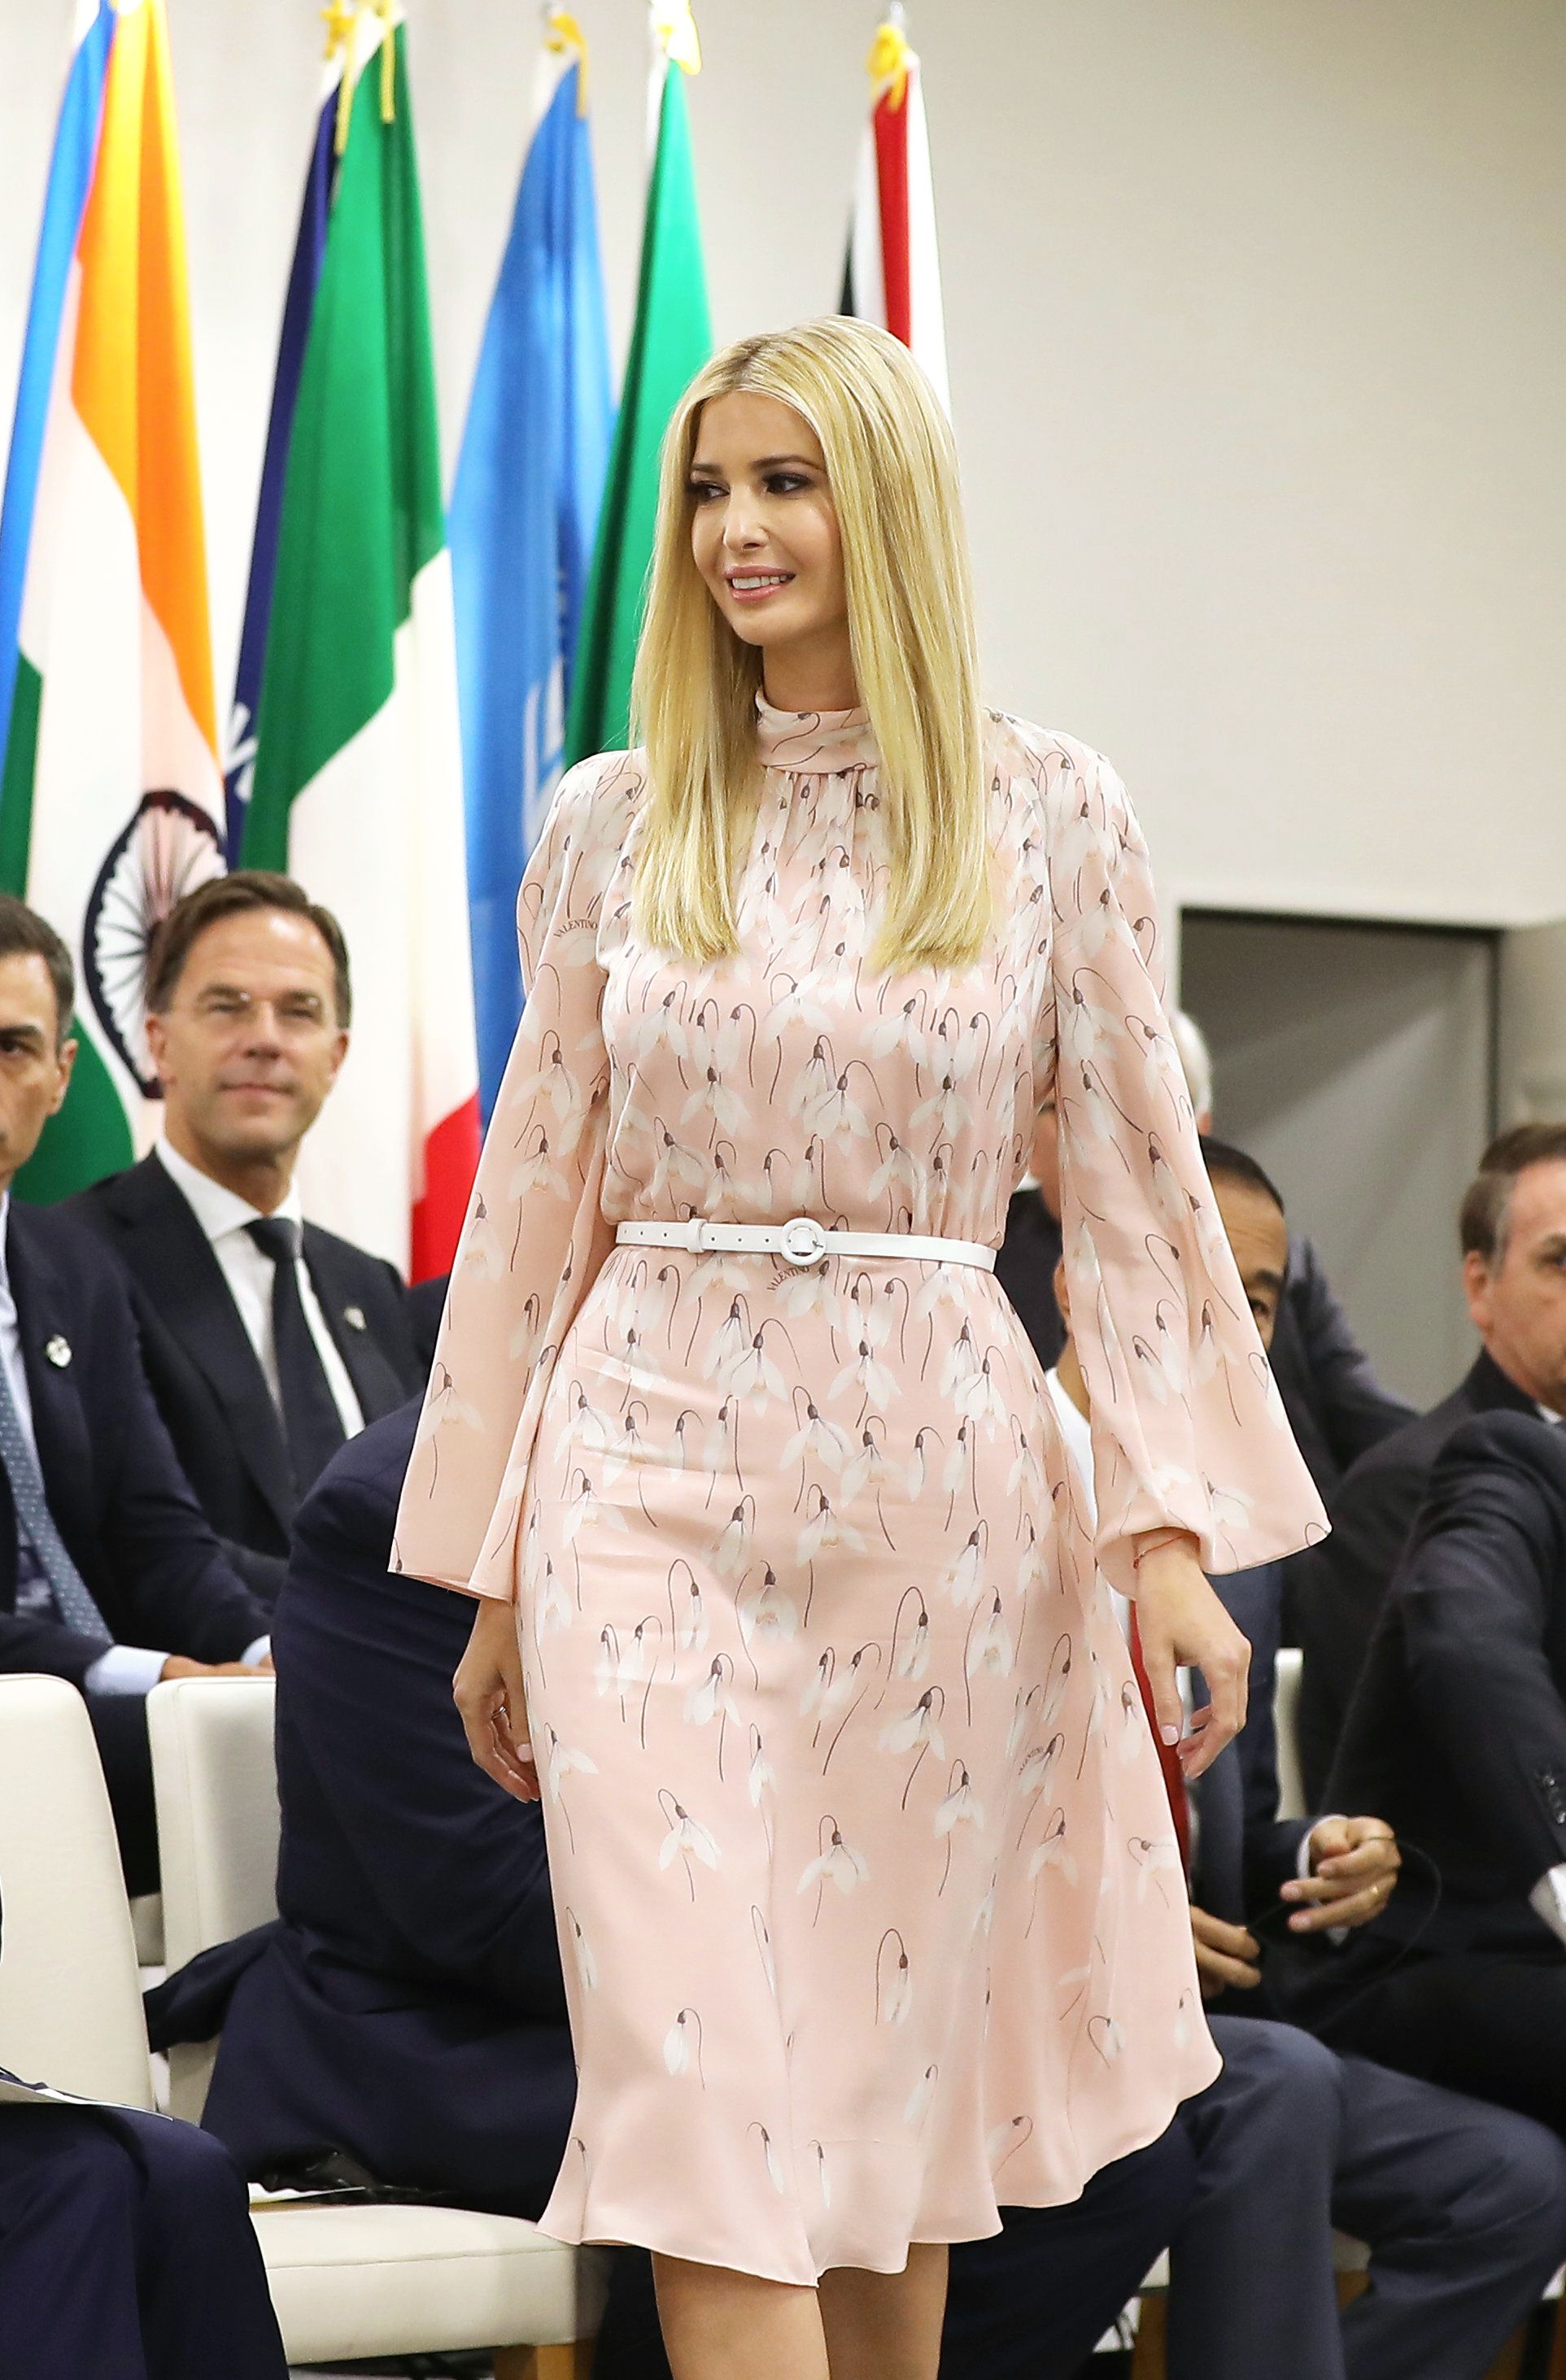 Ivanka Fashion Photos 2021 - First Daughter Ivanka Trump Style Pictures